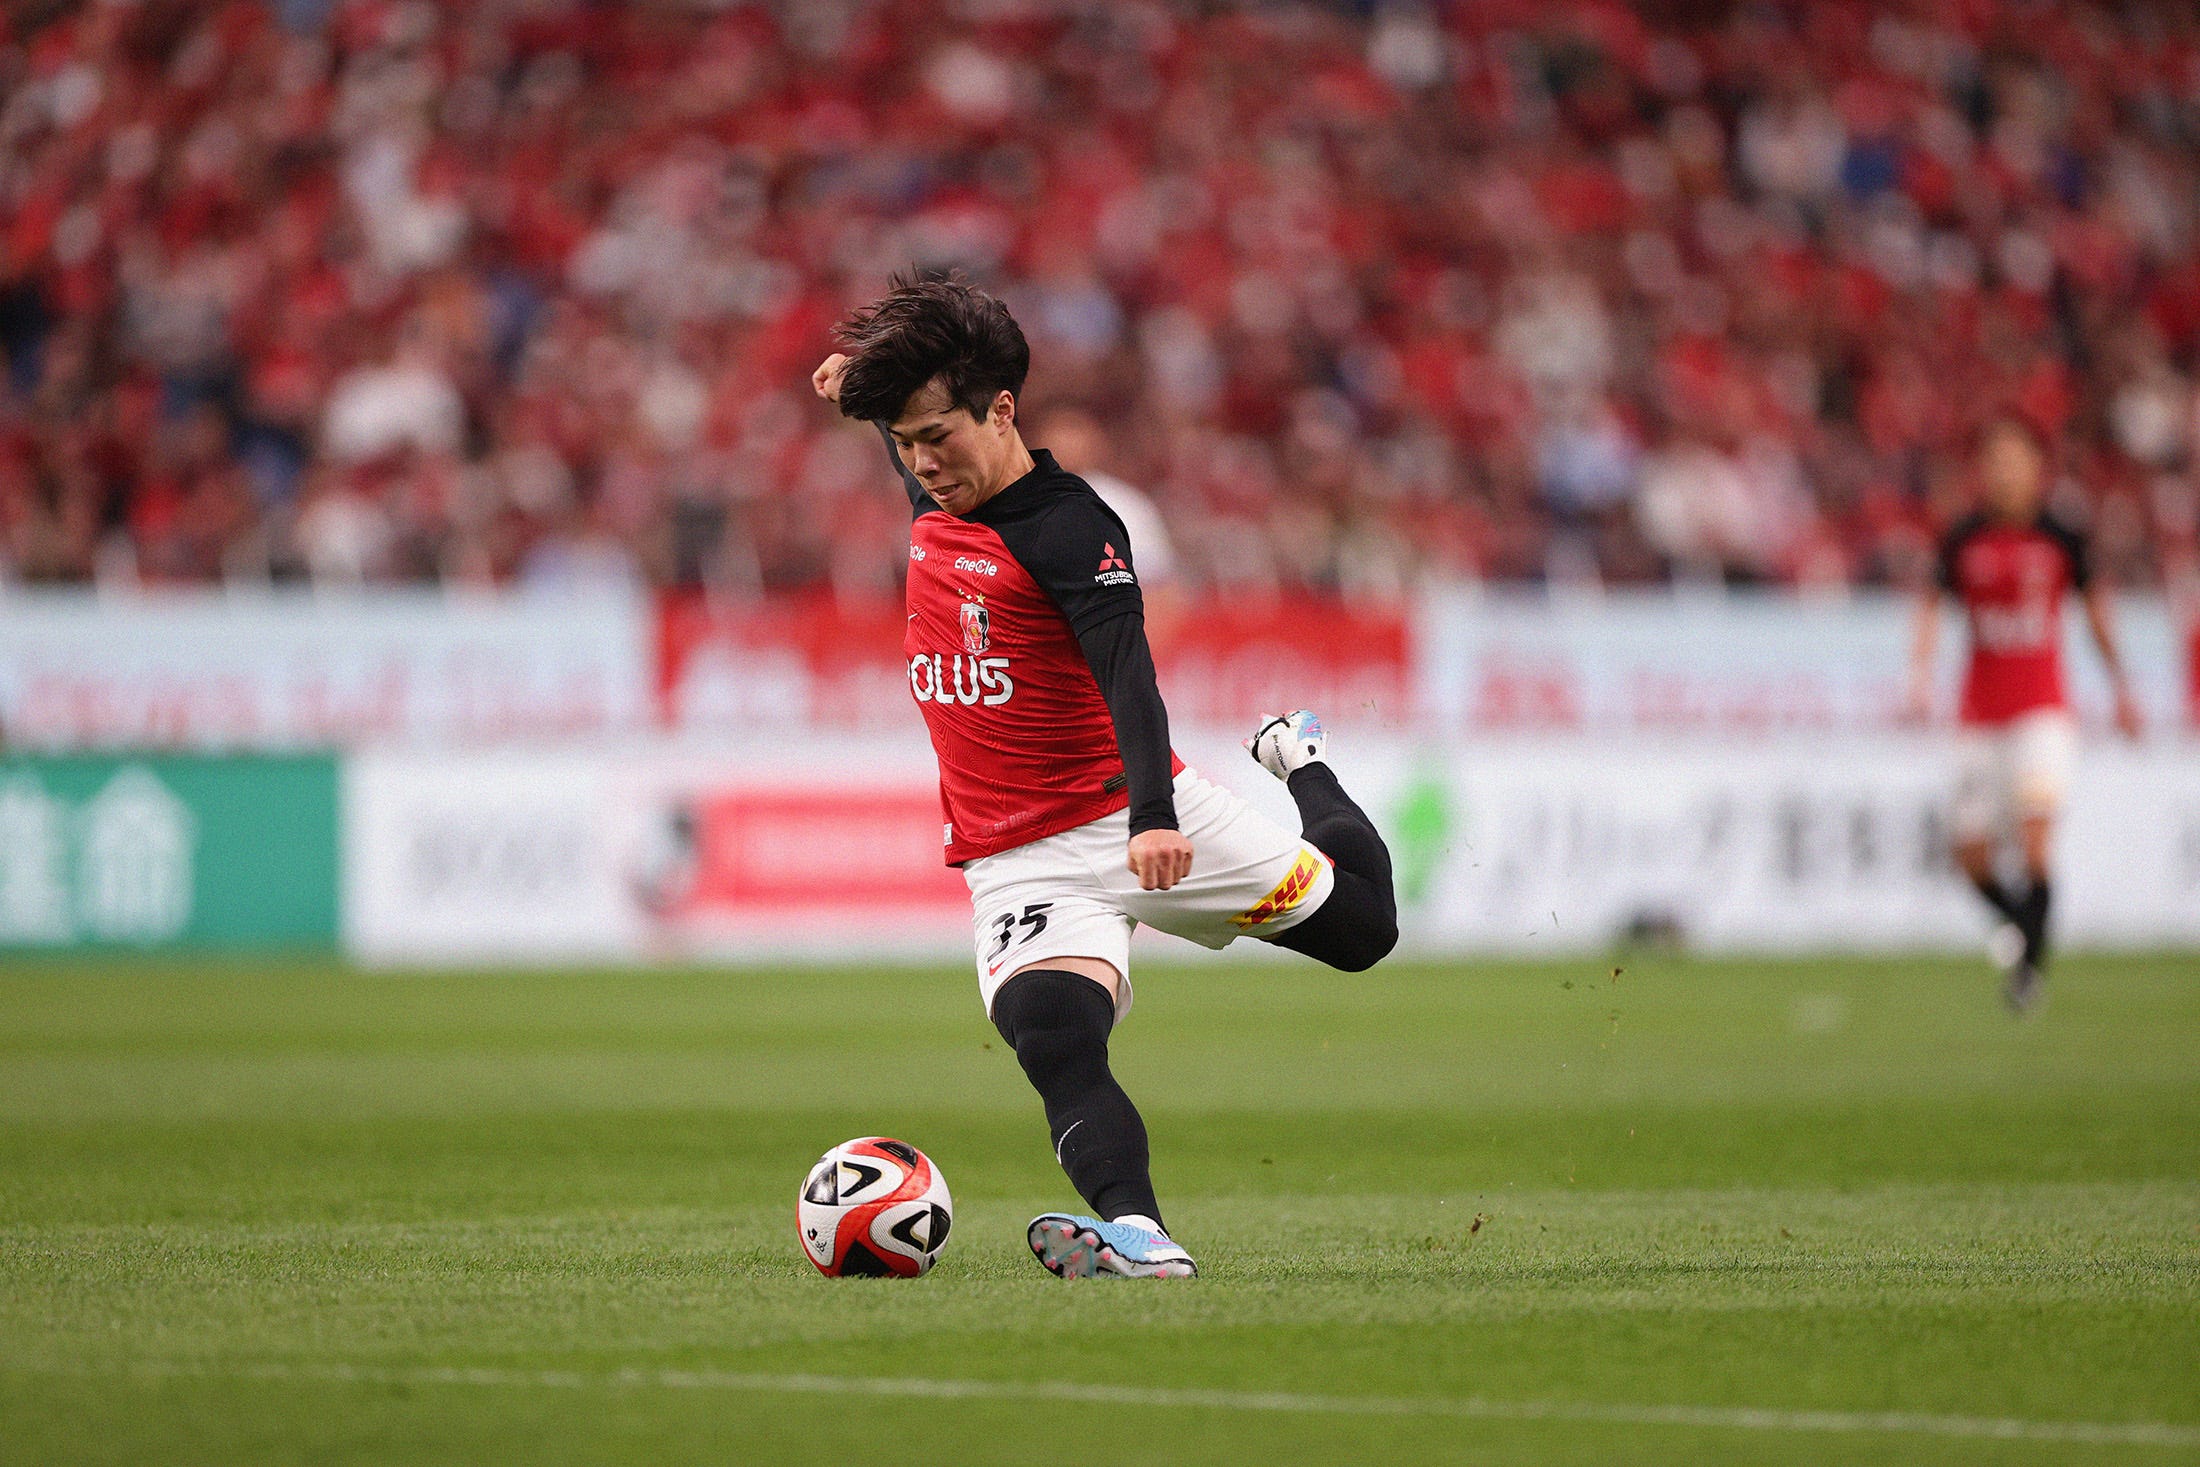 A photo of Urawa Red Diamonds' Jumpei Hayakawa in the action of striking the ball with his left foot.